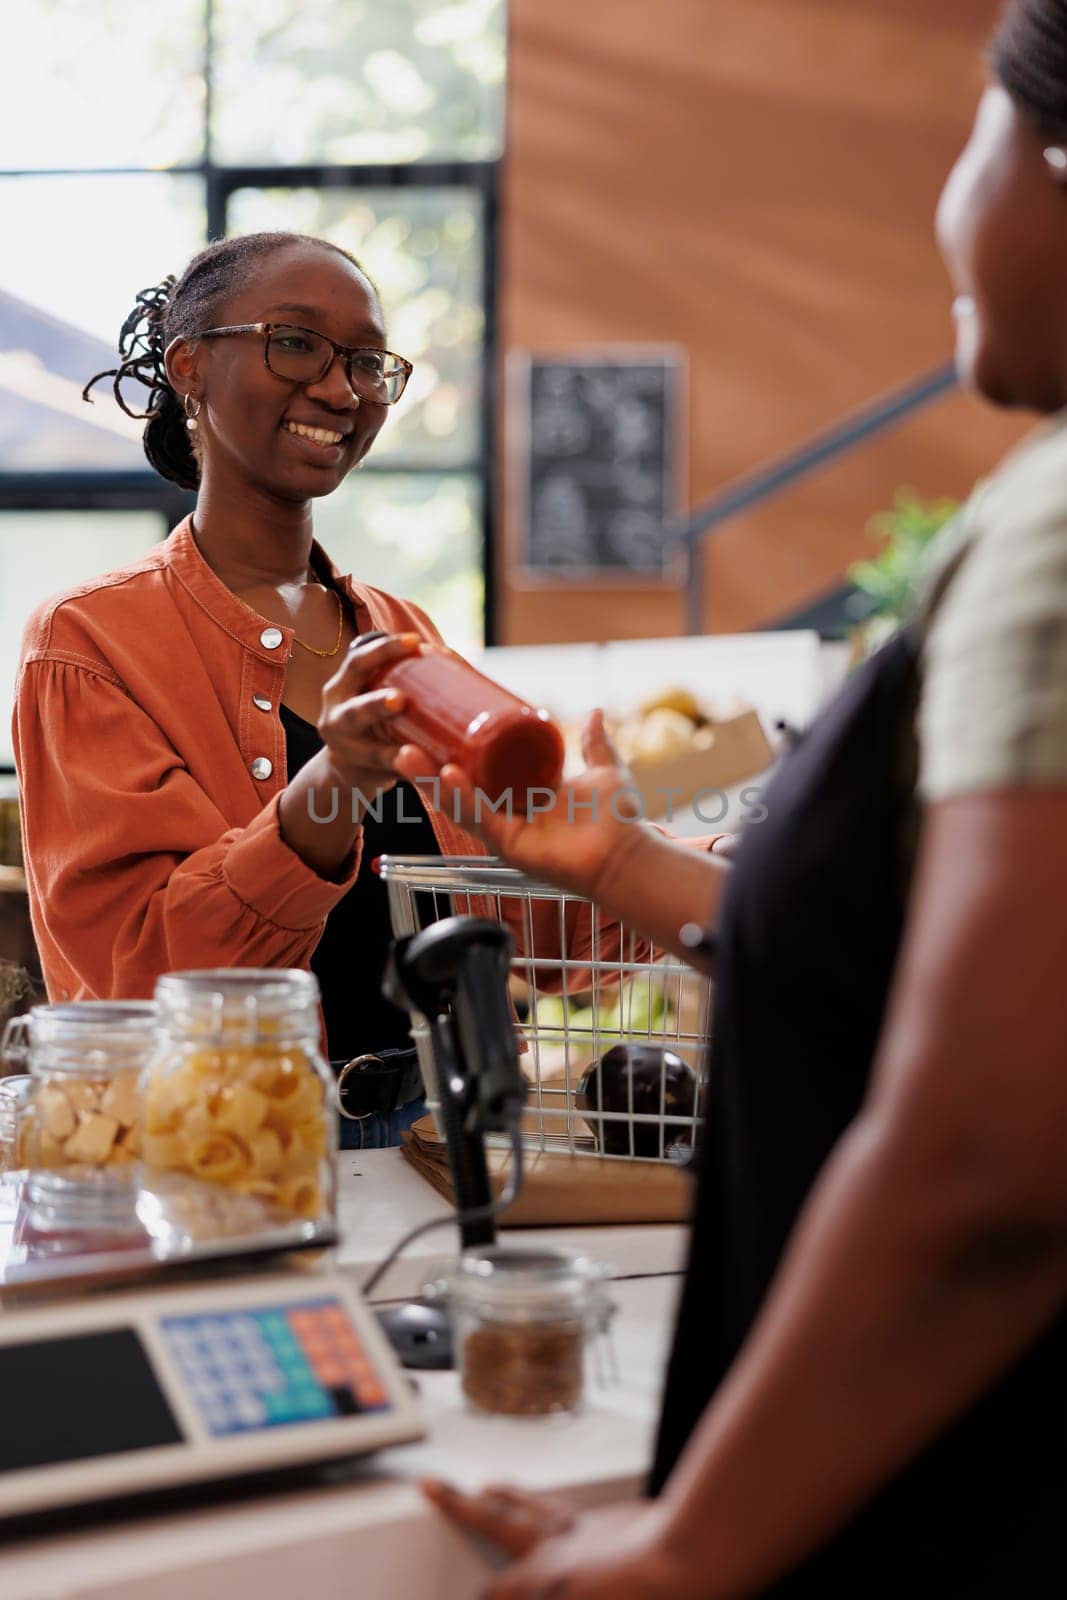 An African American woman sells freshly harvested organic produce to a customer in a grocery market. Female vendor receiving bottled sauce from smiling customer a checkout counter.